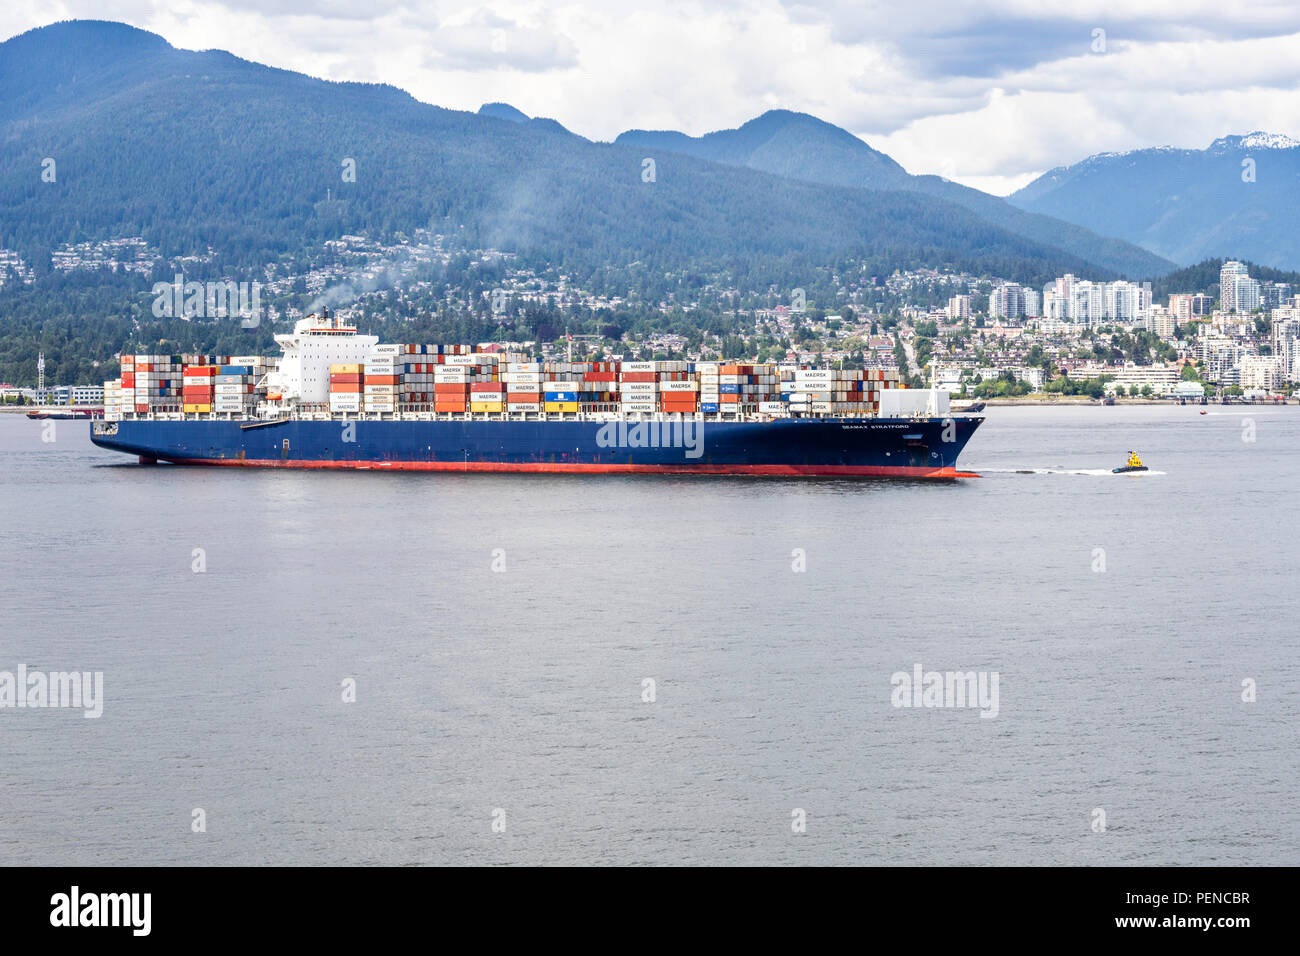 The container ship Seamax Stratford coming into the harbour at Vancouver, British Columbia, Canada Stock Photo